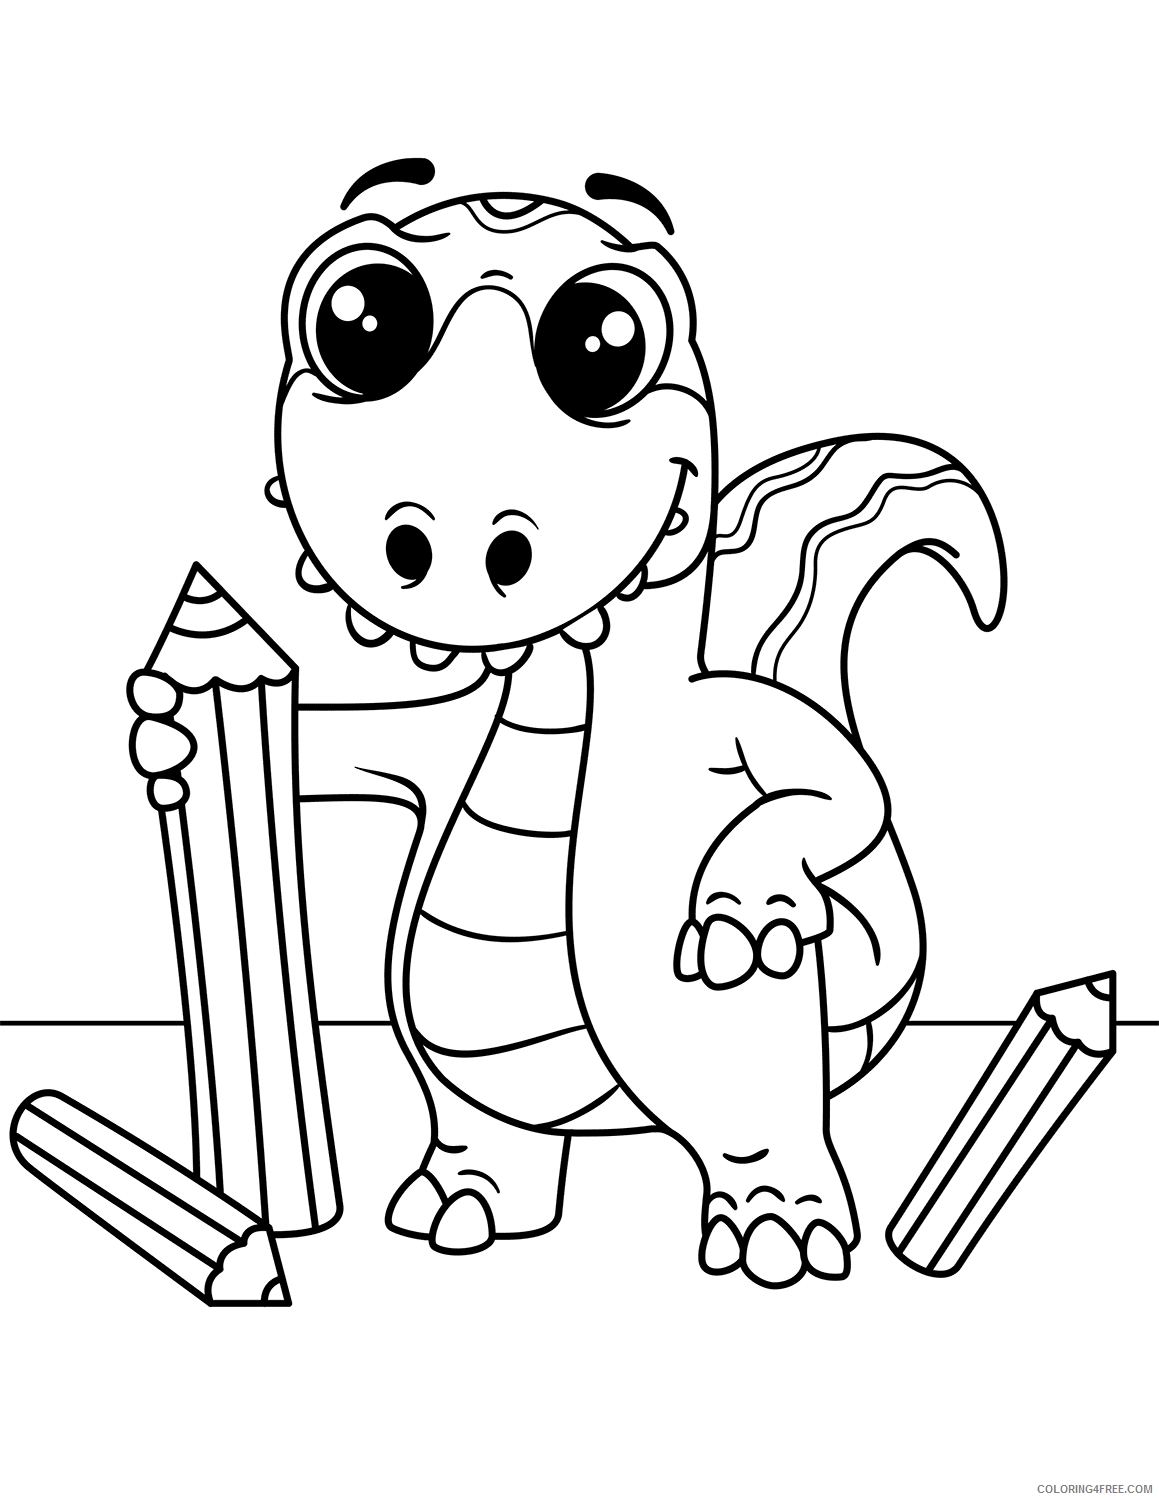 Dinosaurs Coloring Pages for boys cute dinosaur free Printable 2020 0258 Coloring4free